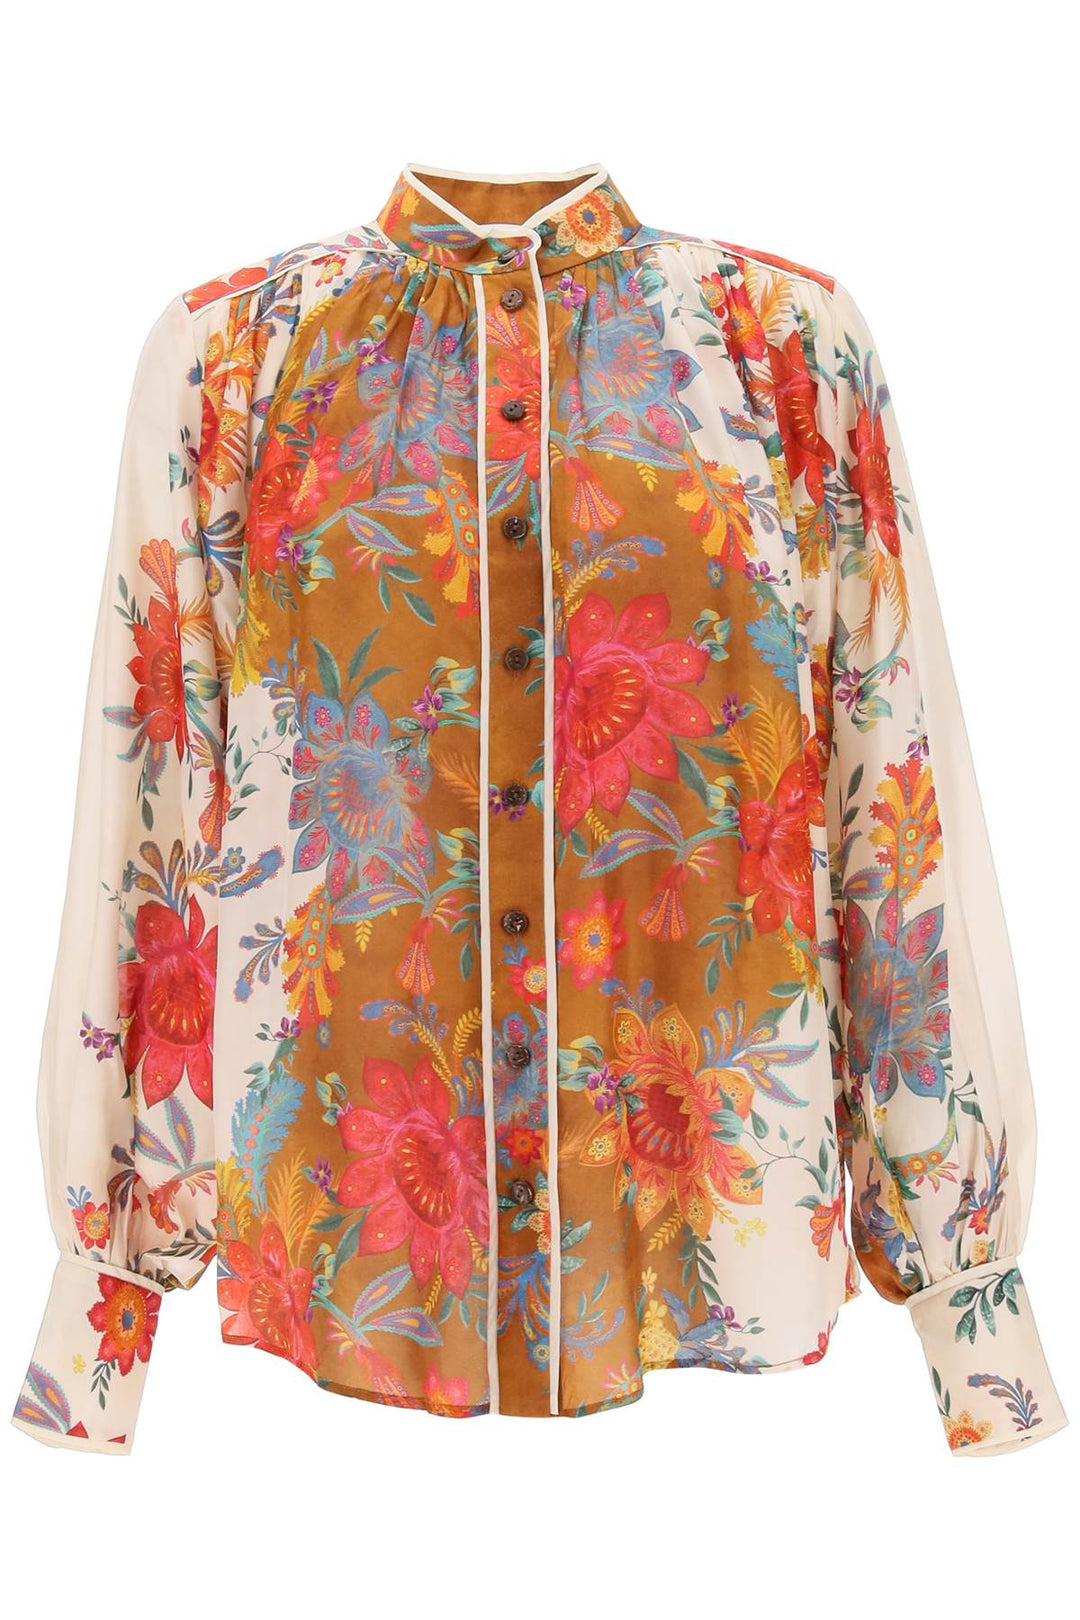 Zimmermann 'Ginger' Blouse With Floral Motif   Beige